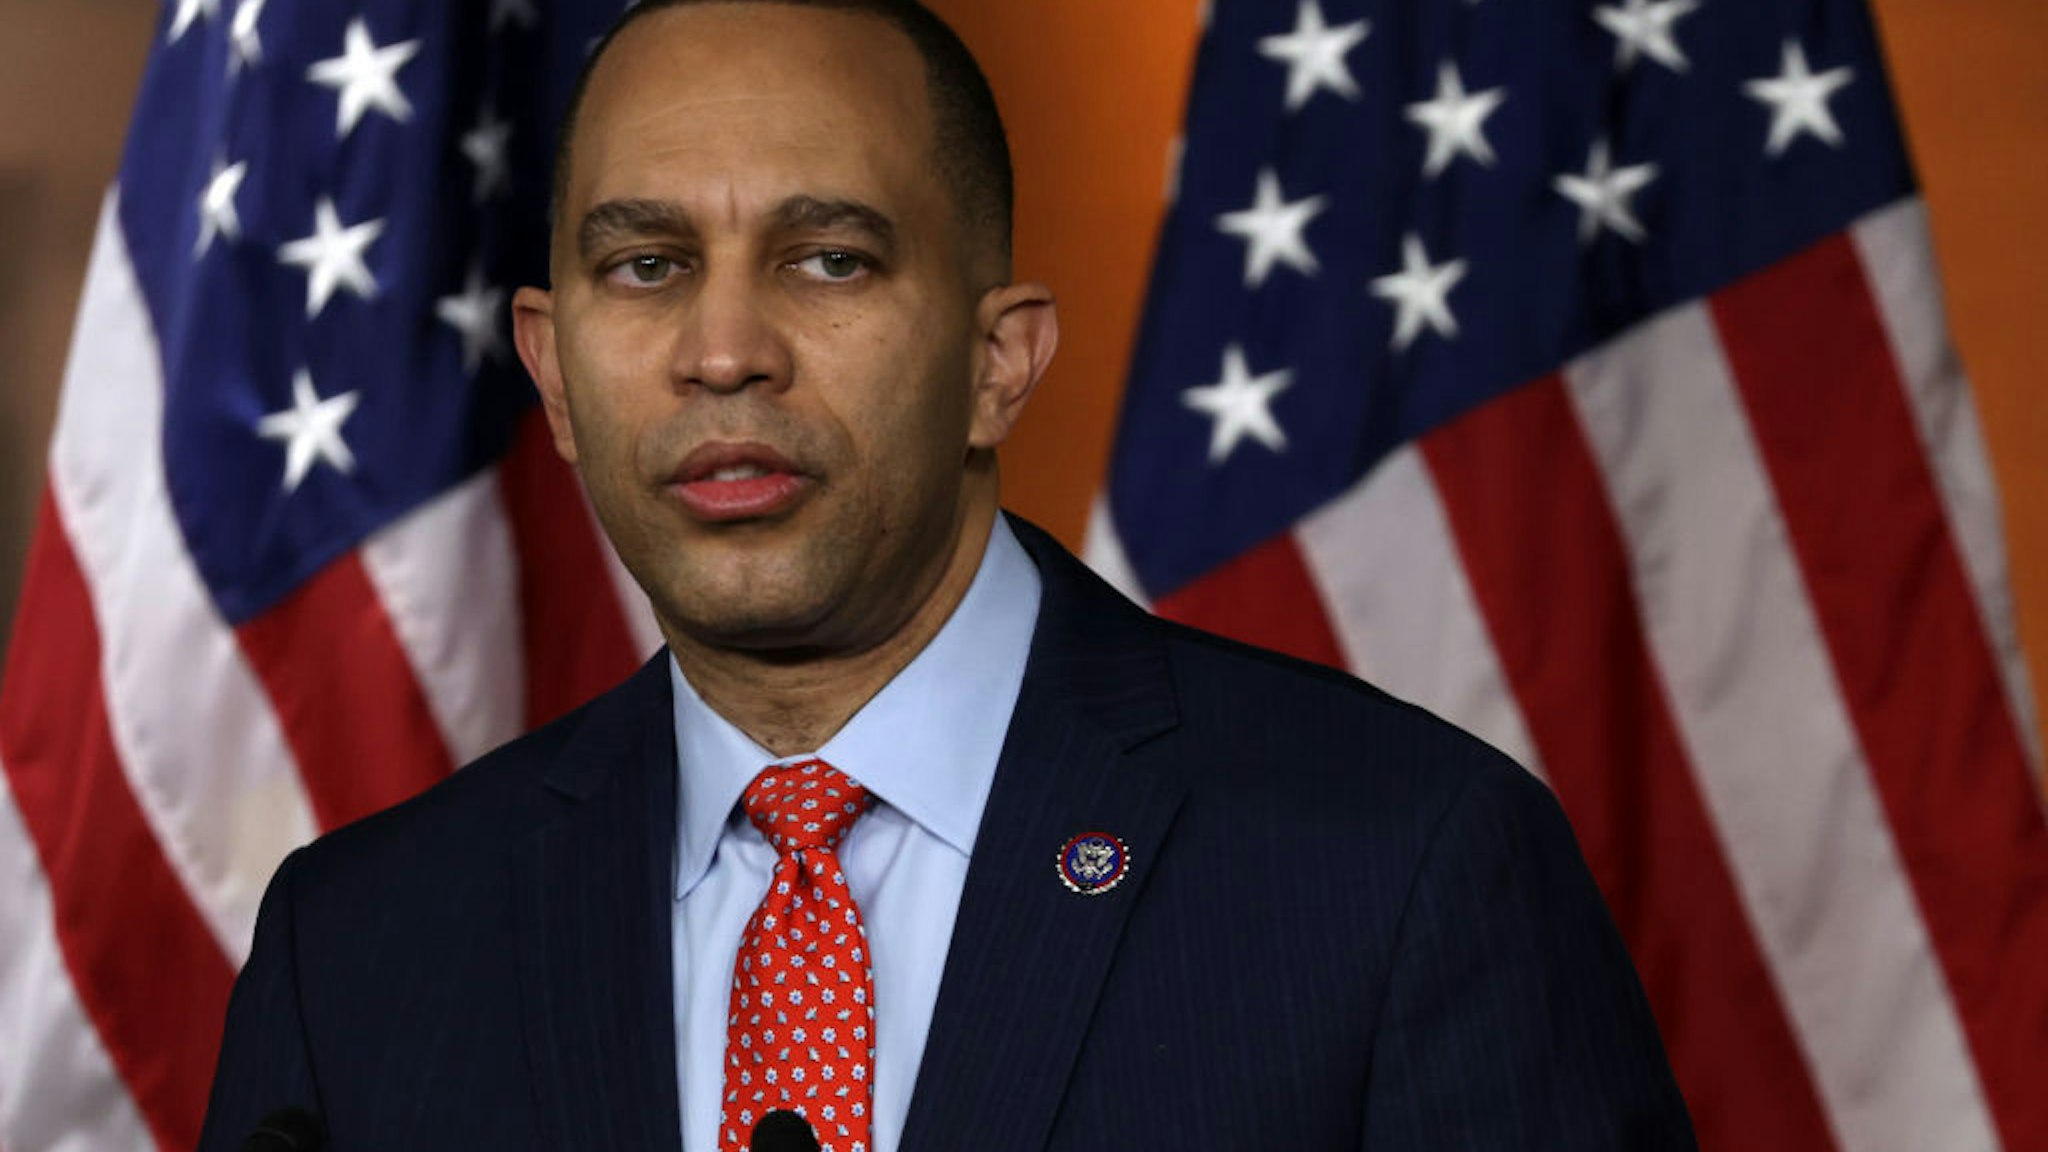 WASHINGTON, DC - FEBRUARY 02: House Democratic Caucus Chairman Rep. Hakeem Jeffries (D-NY) speaks during a news conference at the U.S. Capitol on February 2, 2022 in Washington, DC. House Democratic leadership held a news conference to discuss Democratic agenda. (Photo by Alex Wong/Getty Images)